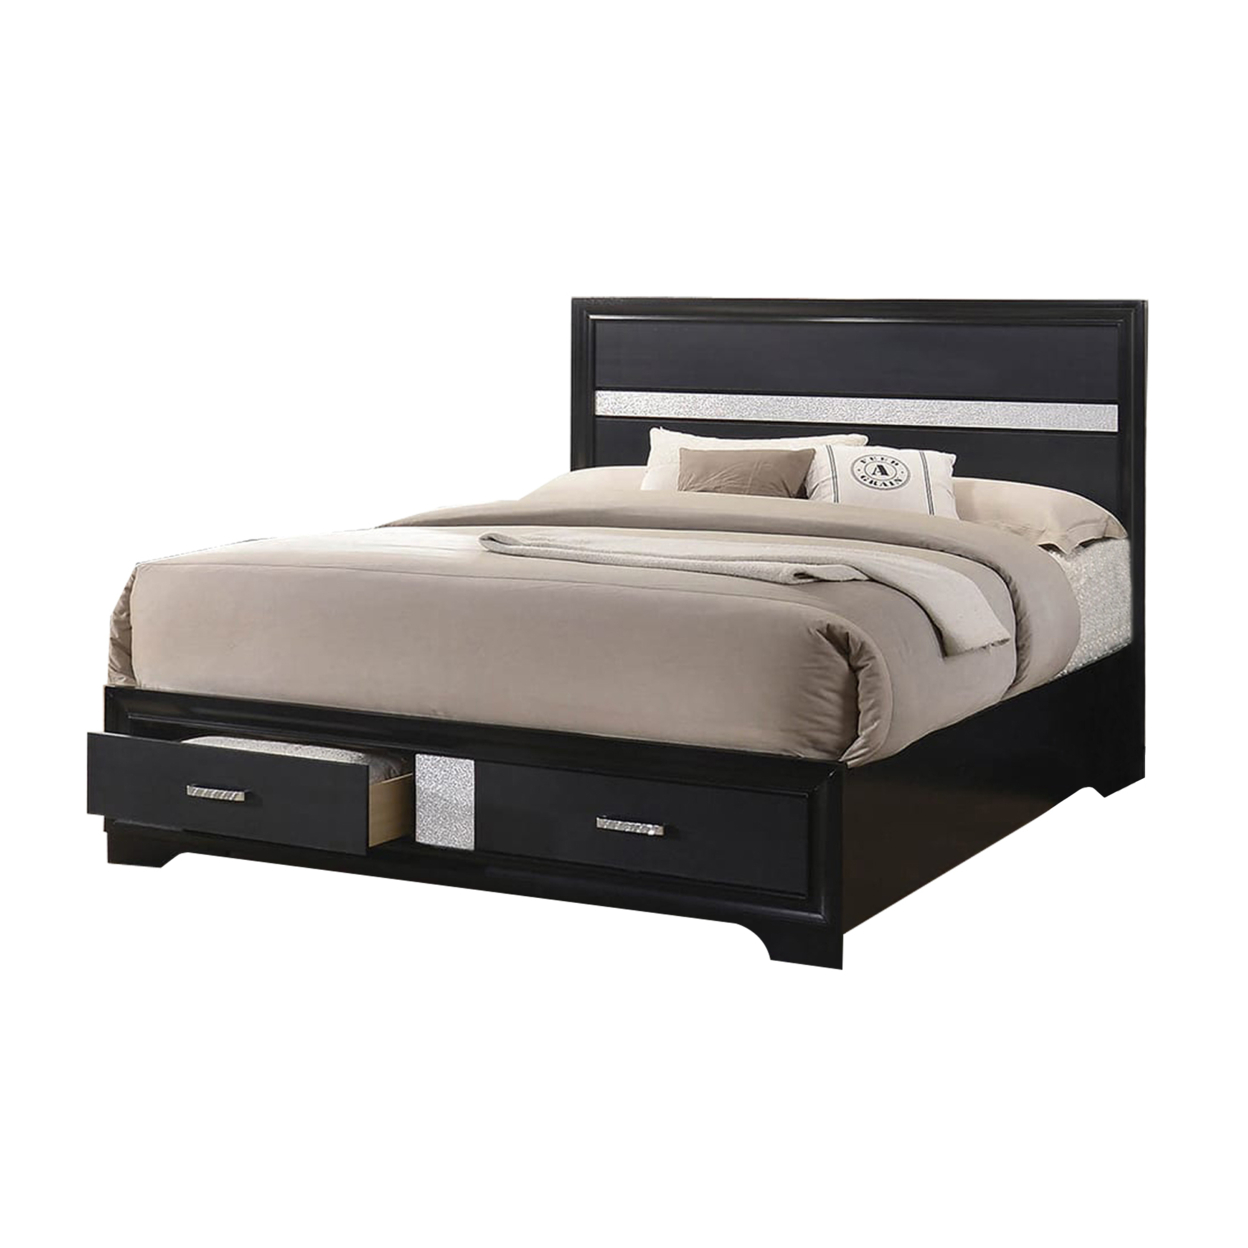 Wooden California King Size Bed With 2 Storage Drawers, Black And Silver- Saltoro Sherpi